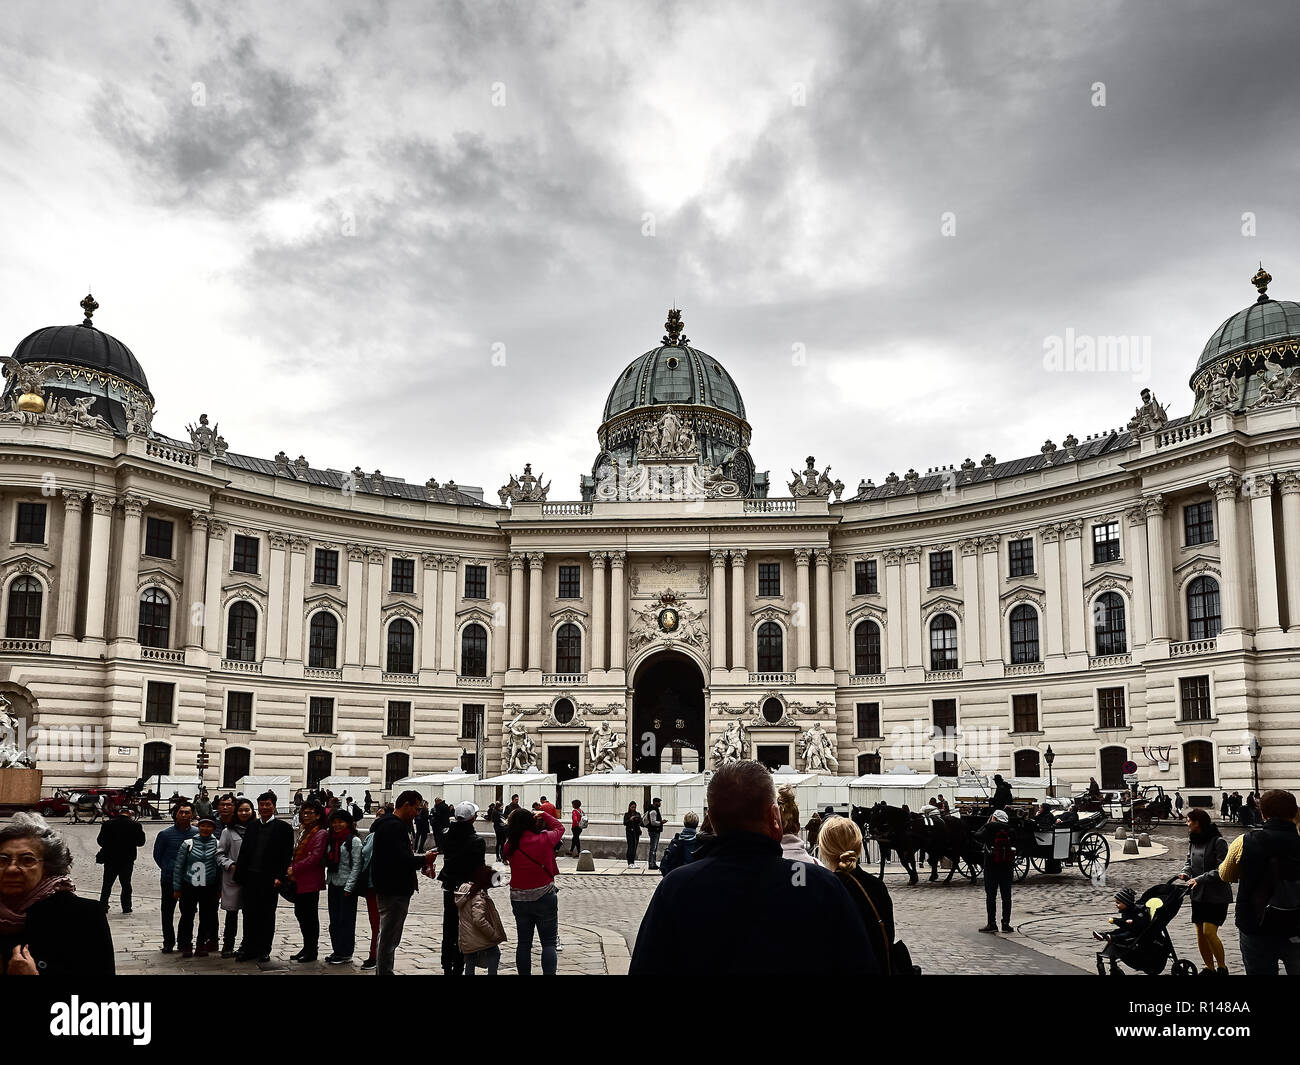 Vienna, Austria - November 1, 2018 - View of the Hofburg palace in Vienna city center. It's the historical royal palace. People are walking around to  Stock Photo